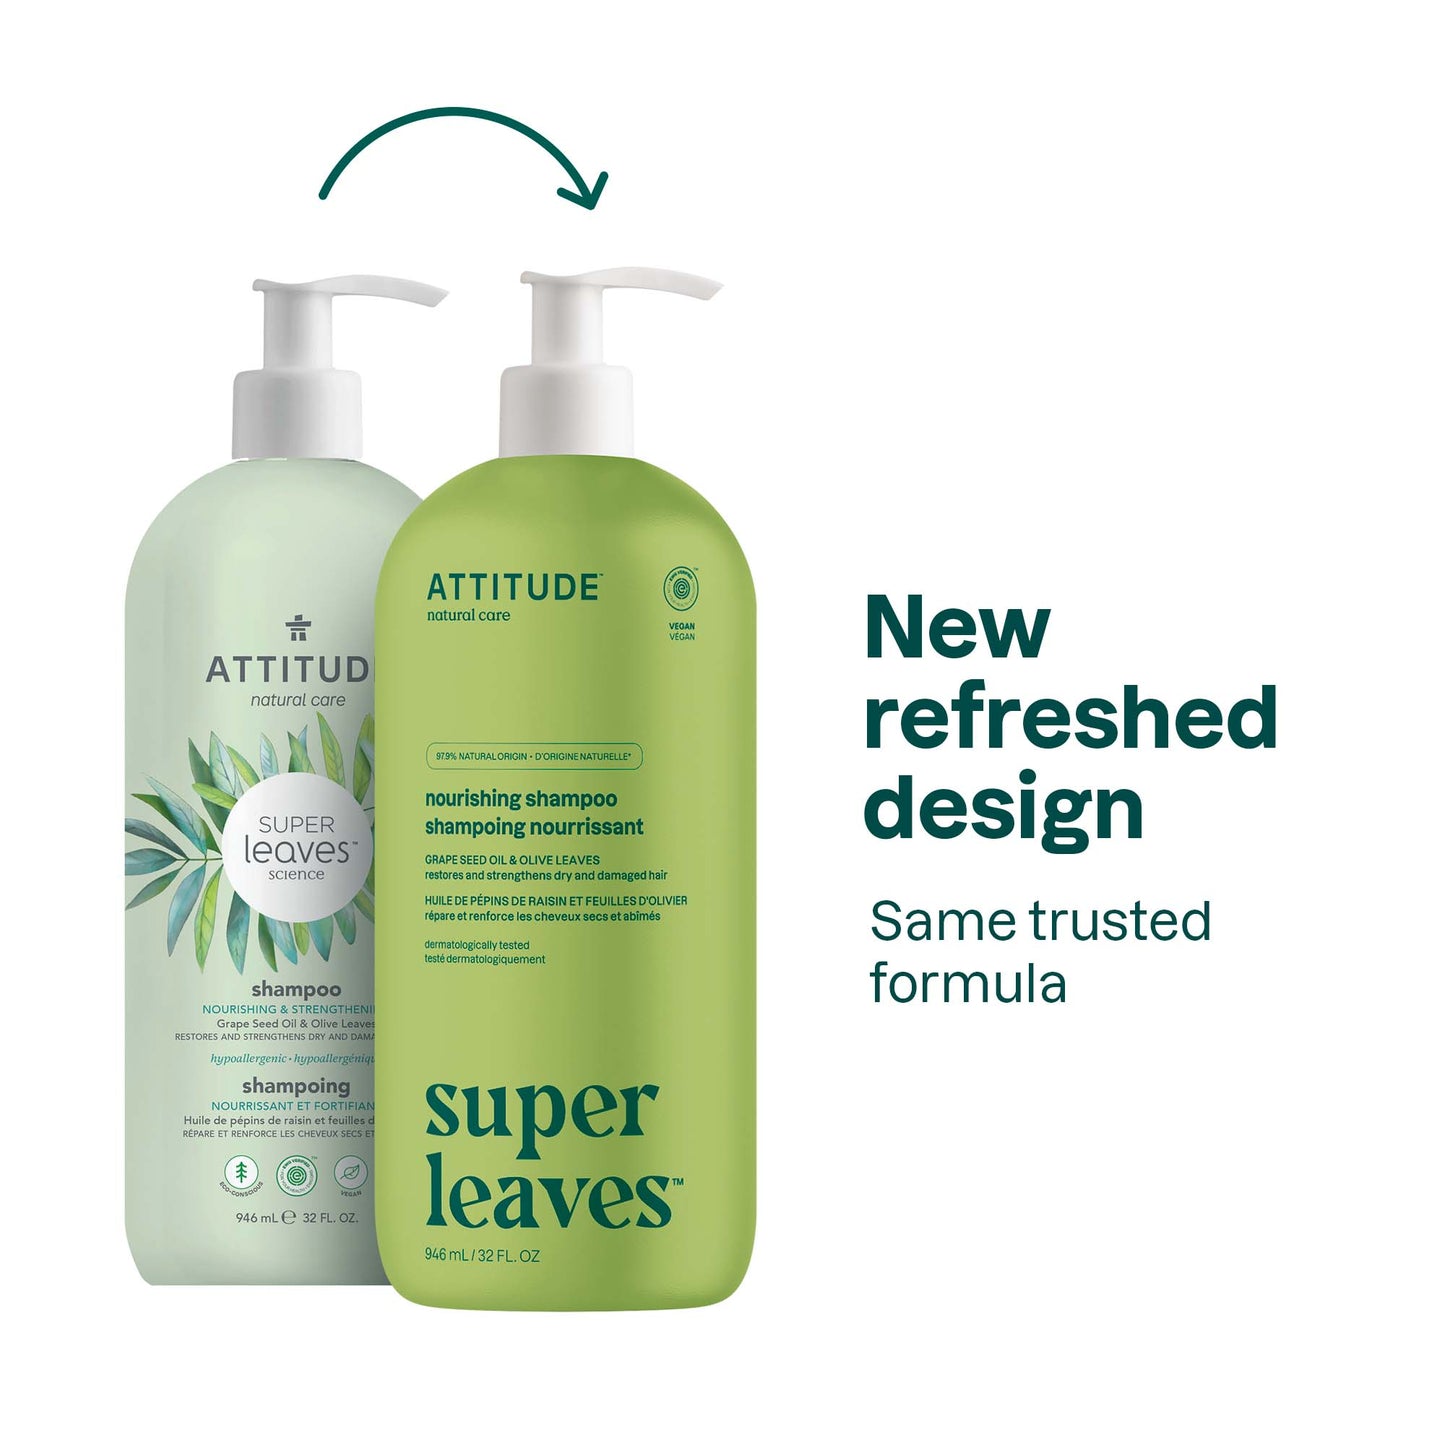 ATTITUDE Super leaves™ Shampoo Nourishing & Strengthening Restores and strengthens dry and damaged hair _en? 32 FL. OZ.ATTITUDE Super leaves™ Shampoo Nourishing & Strengthening Restores and strengthens dry and damaged hair 11503_en? 32 FL. OZ.